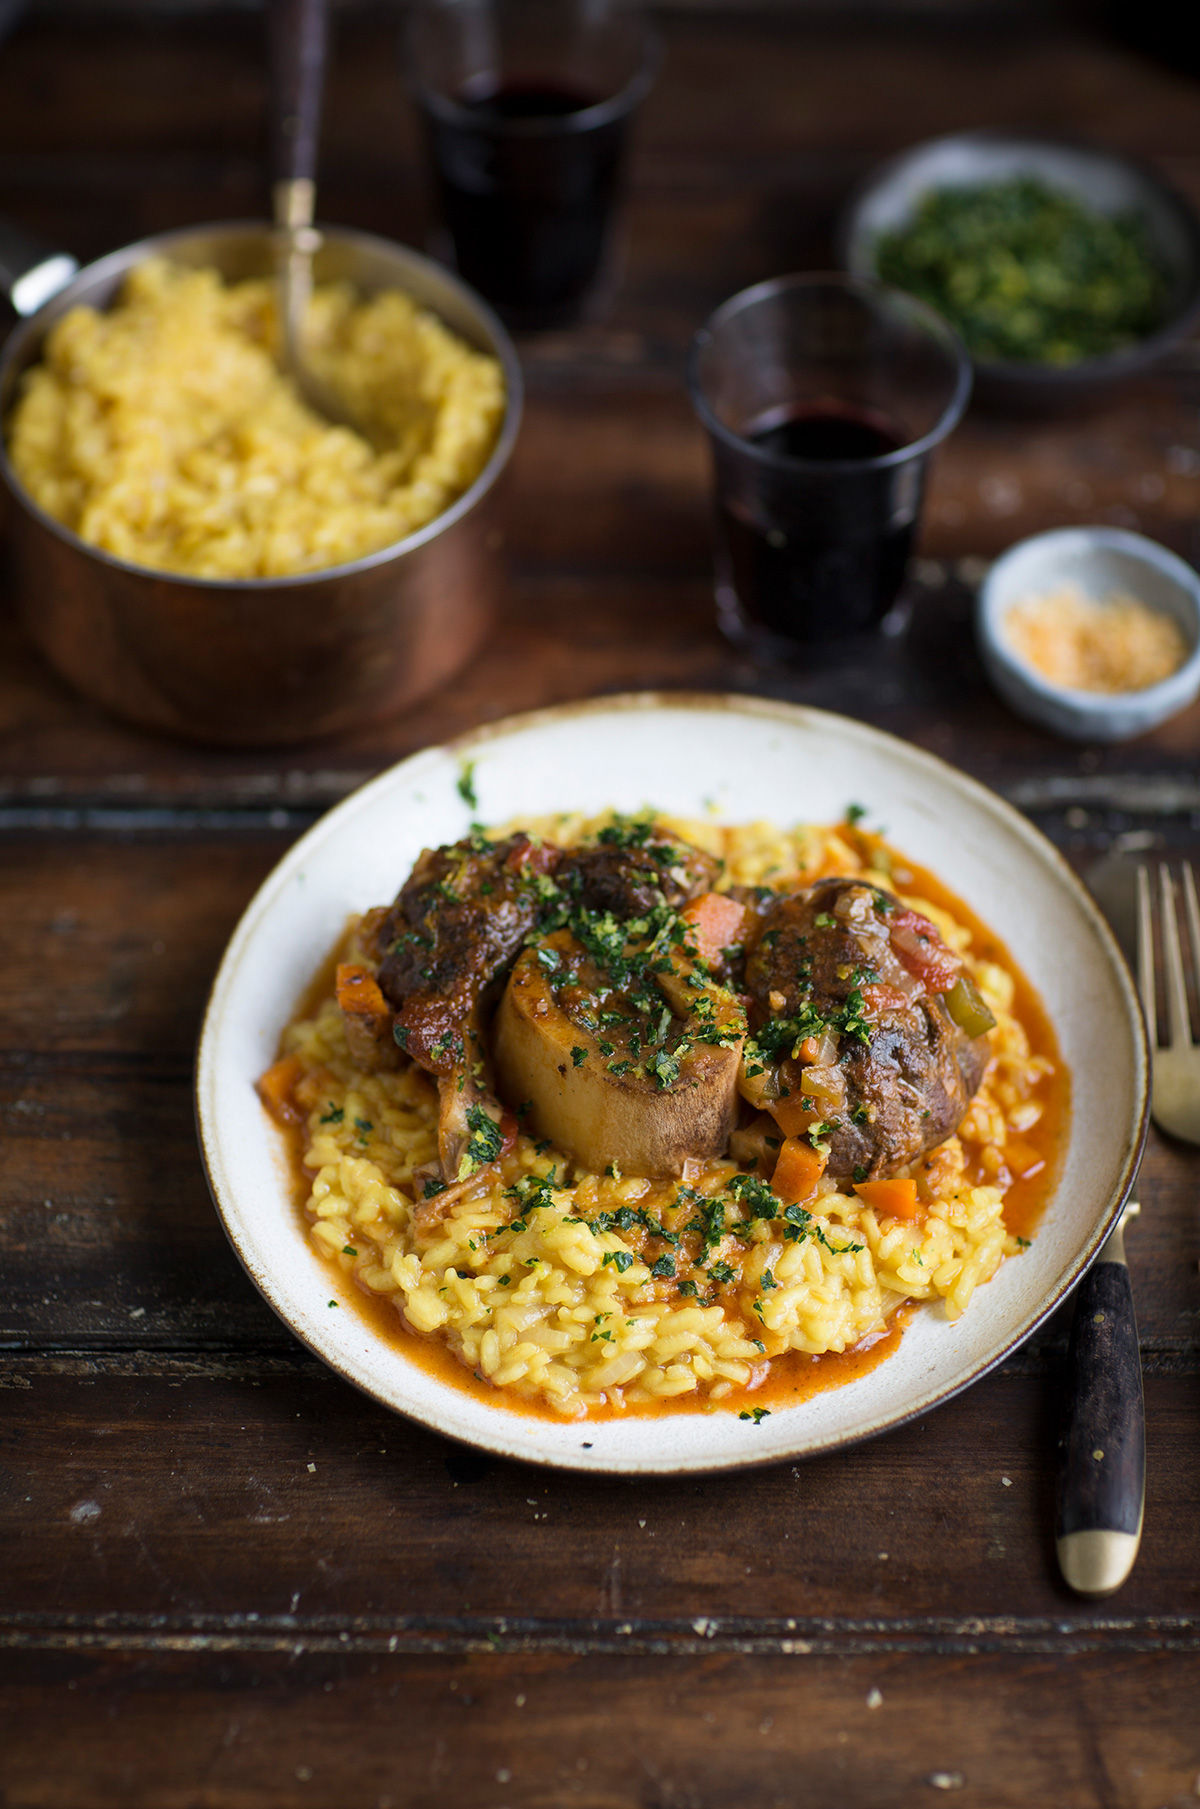 A classic Osso Bucco recipe with risotto Milanese